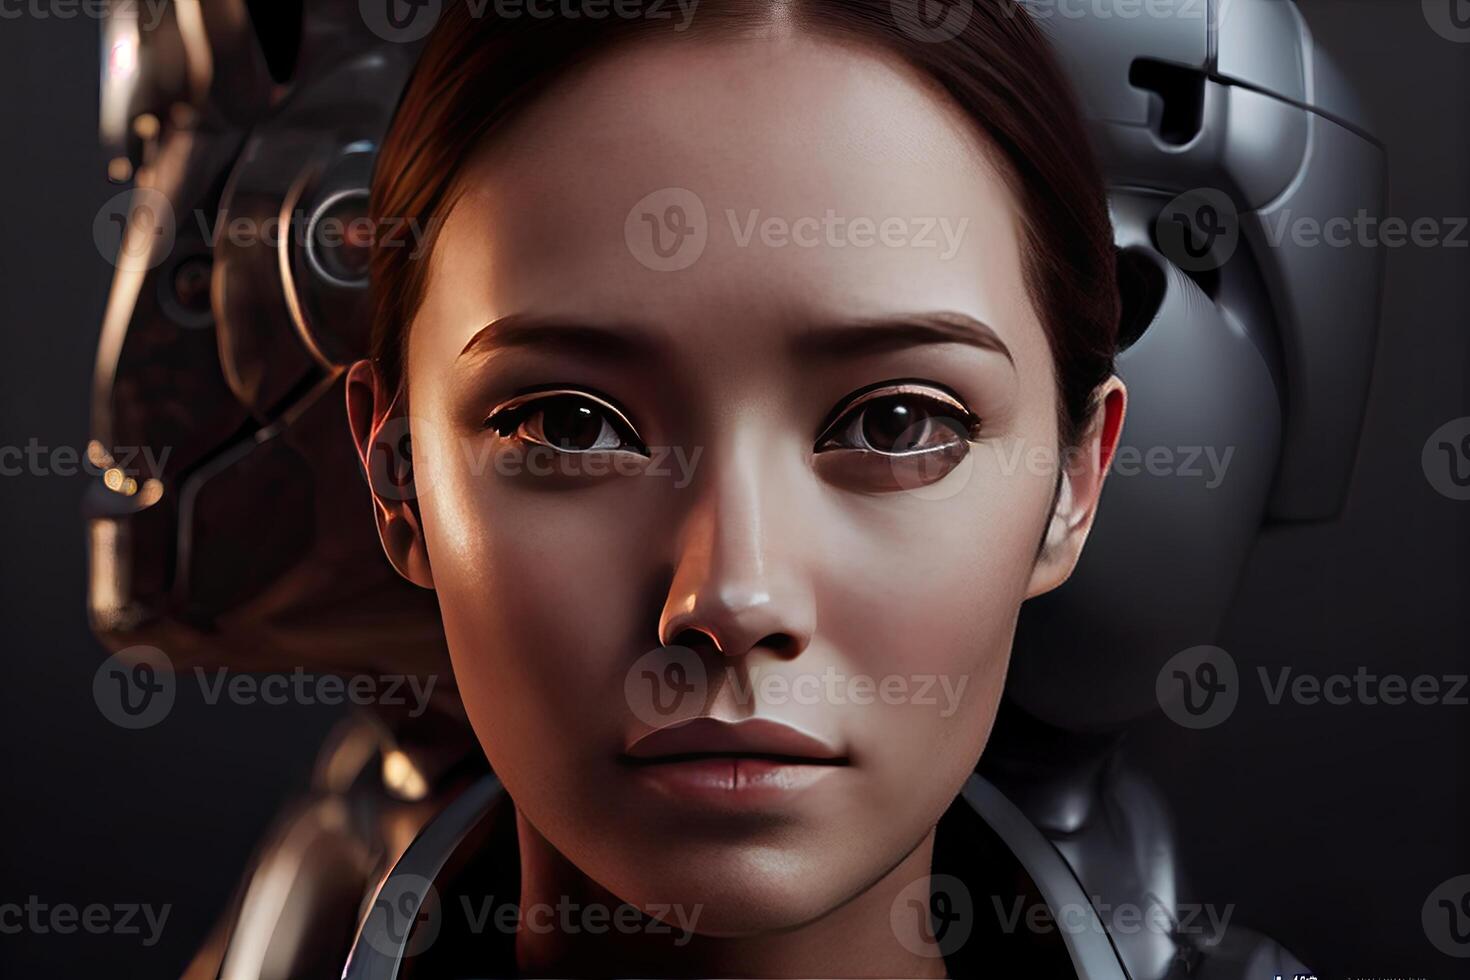 Techno Feminine Female Face in the Age of Virtual and Augmented Reality, photo